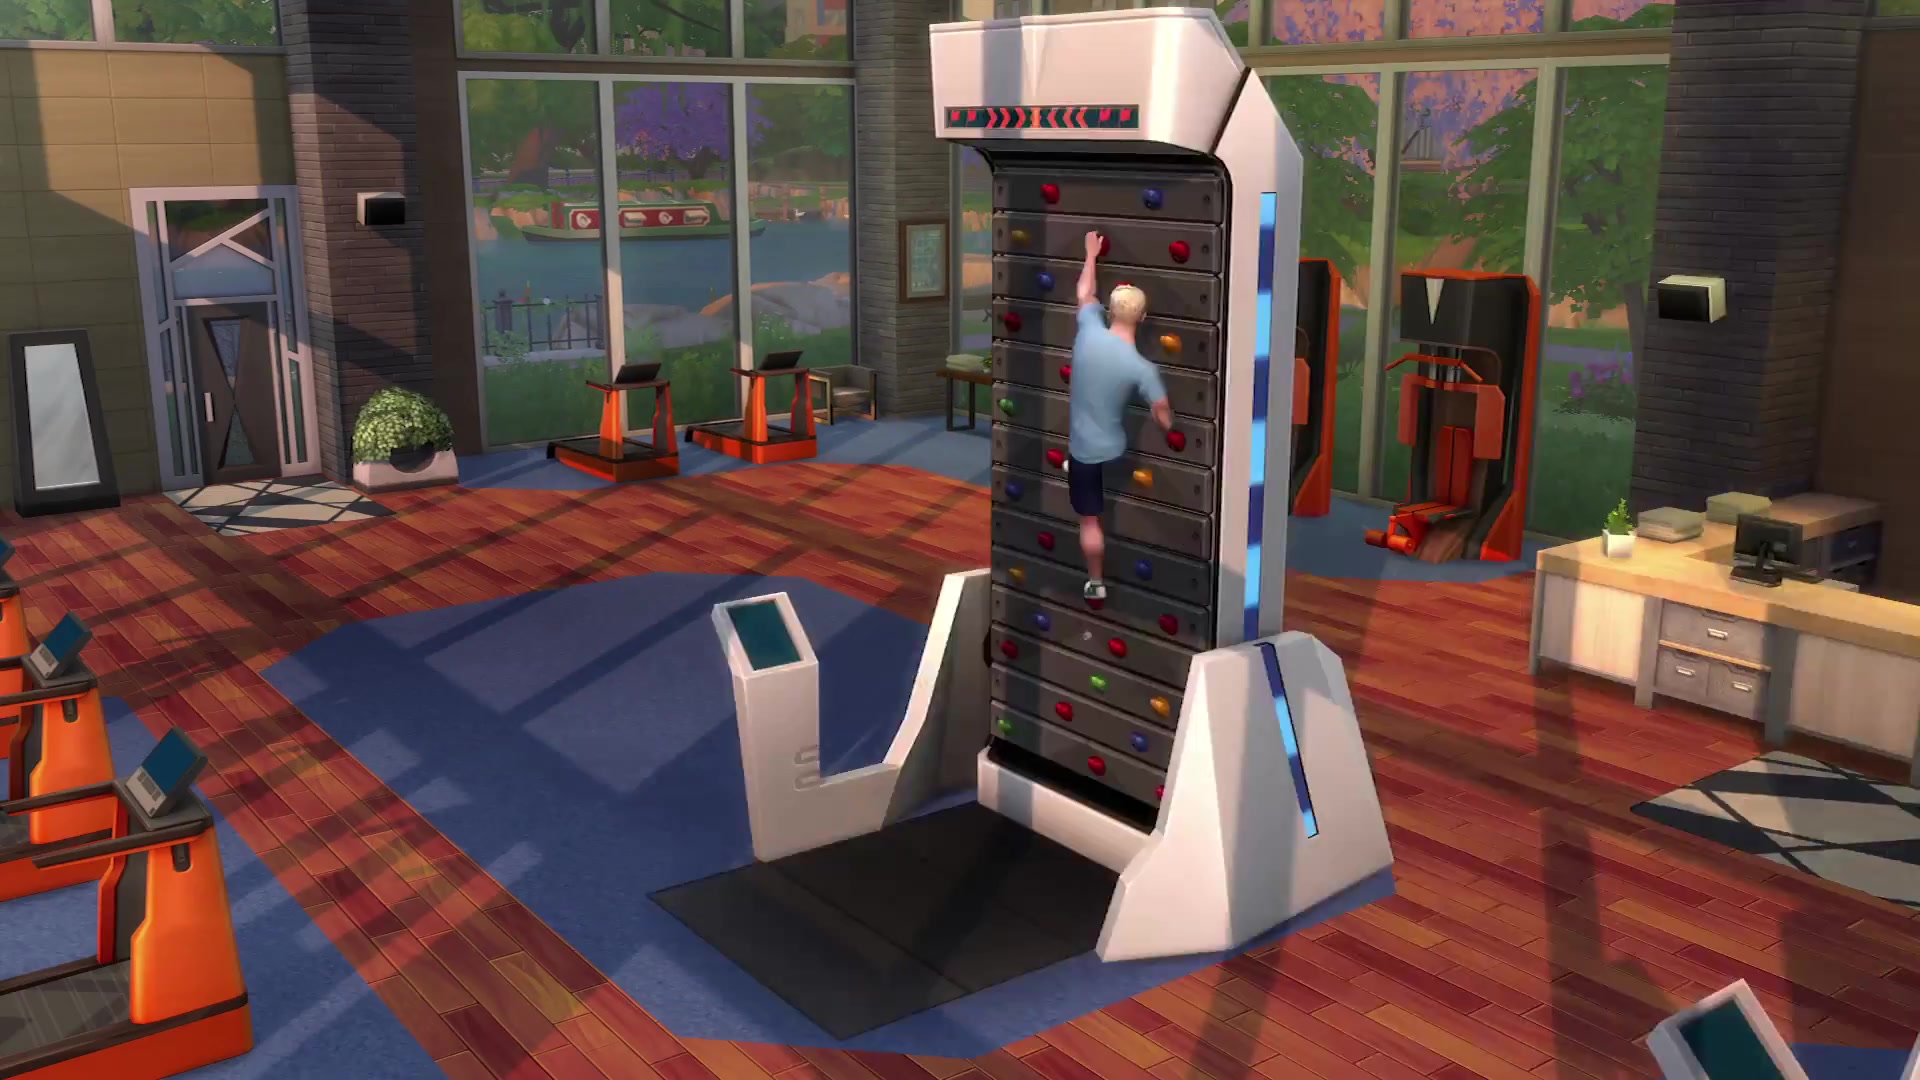 The Sims 4 Fitness Stuff- Official Trailer 0860 | SimsVIP